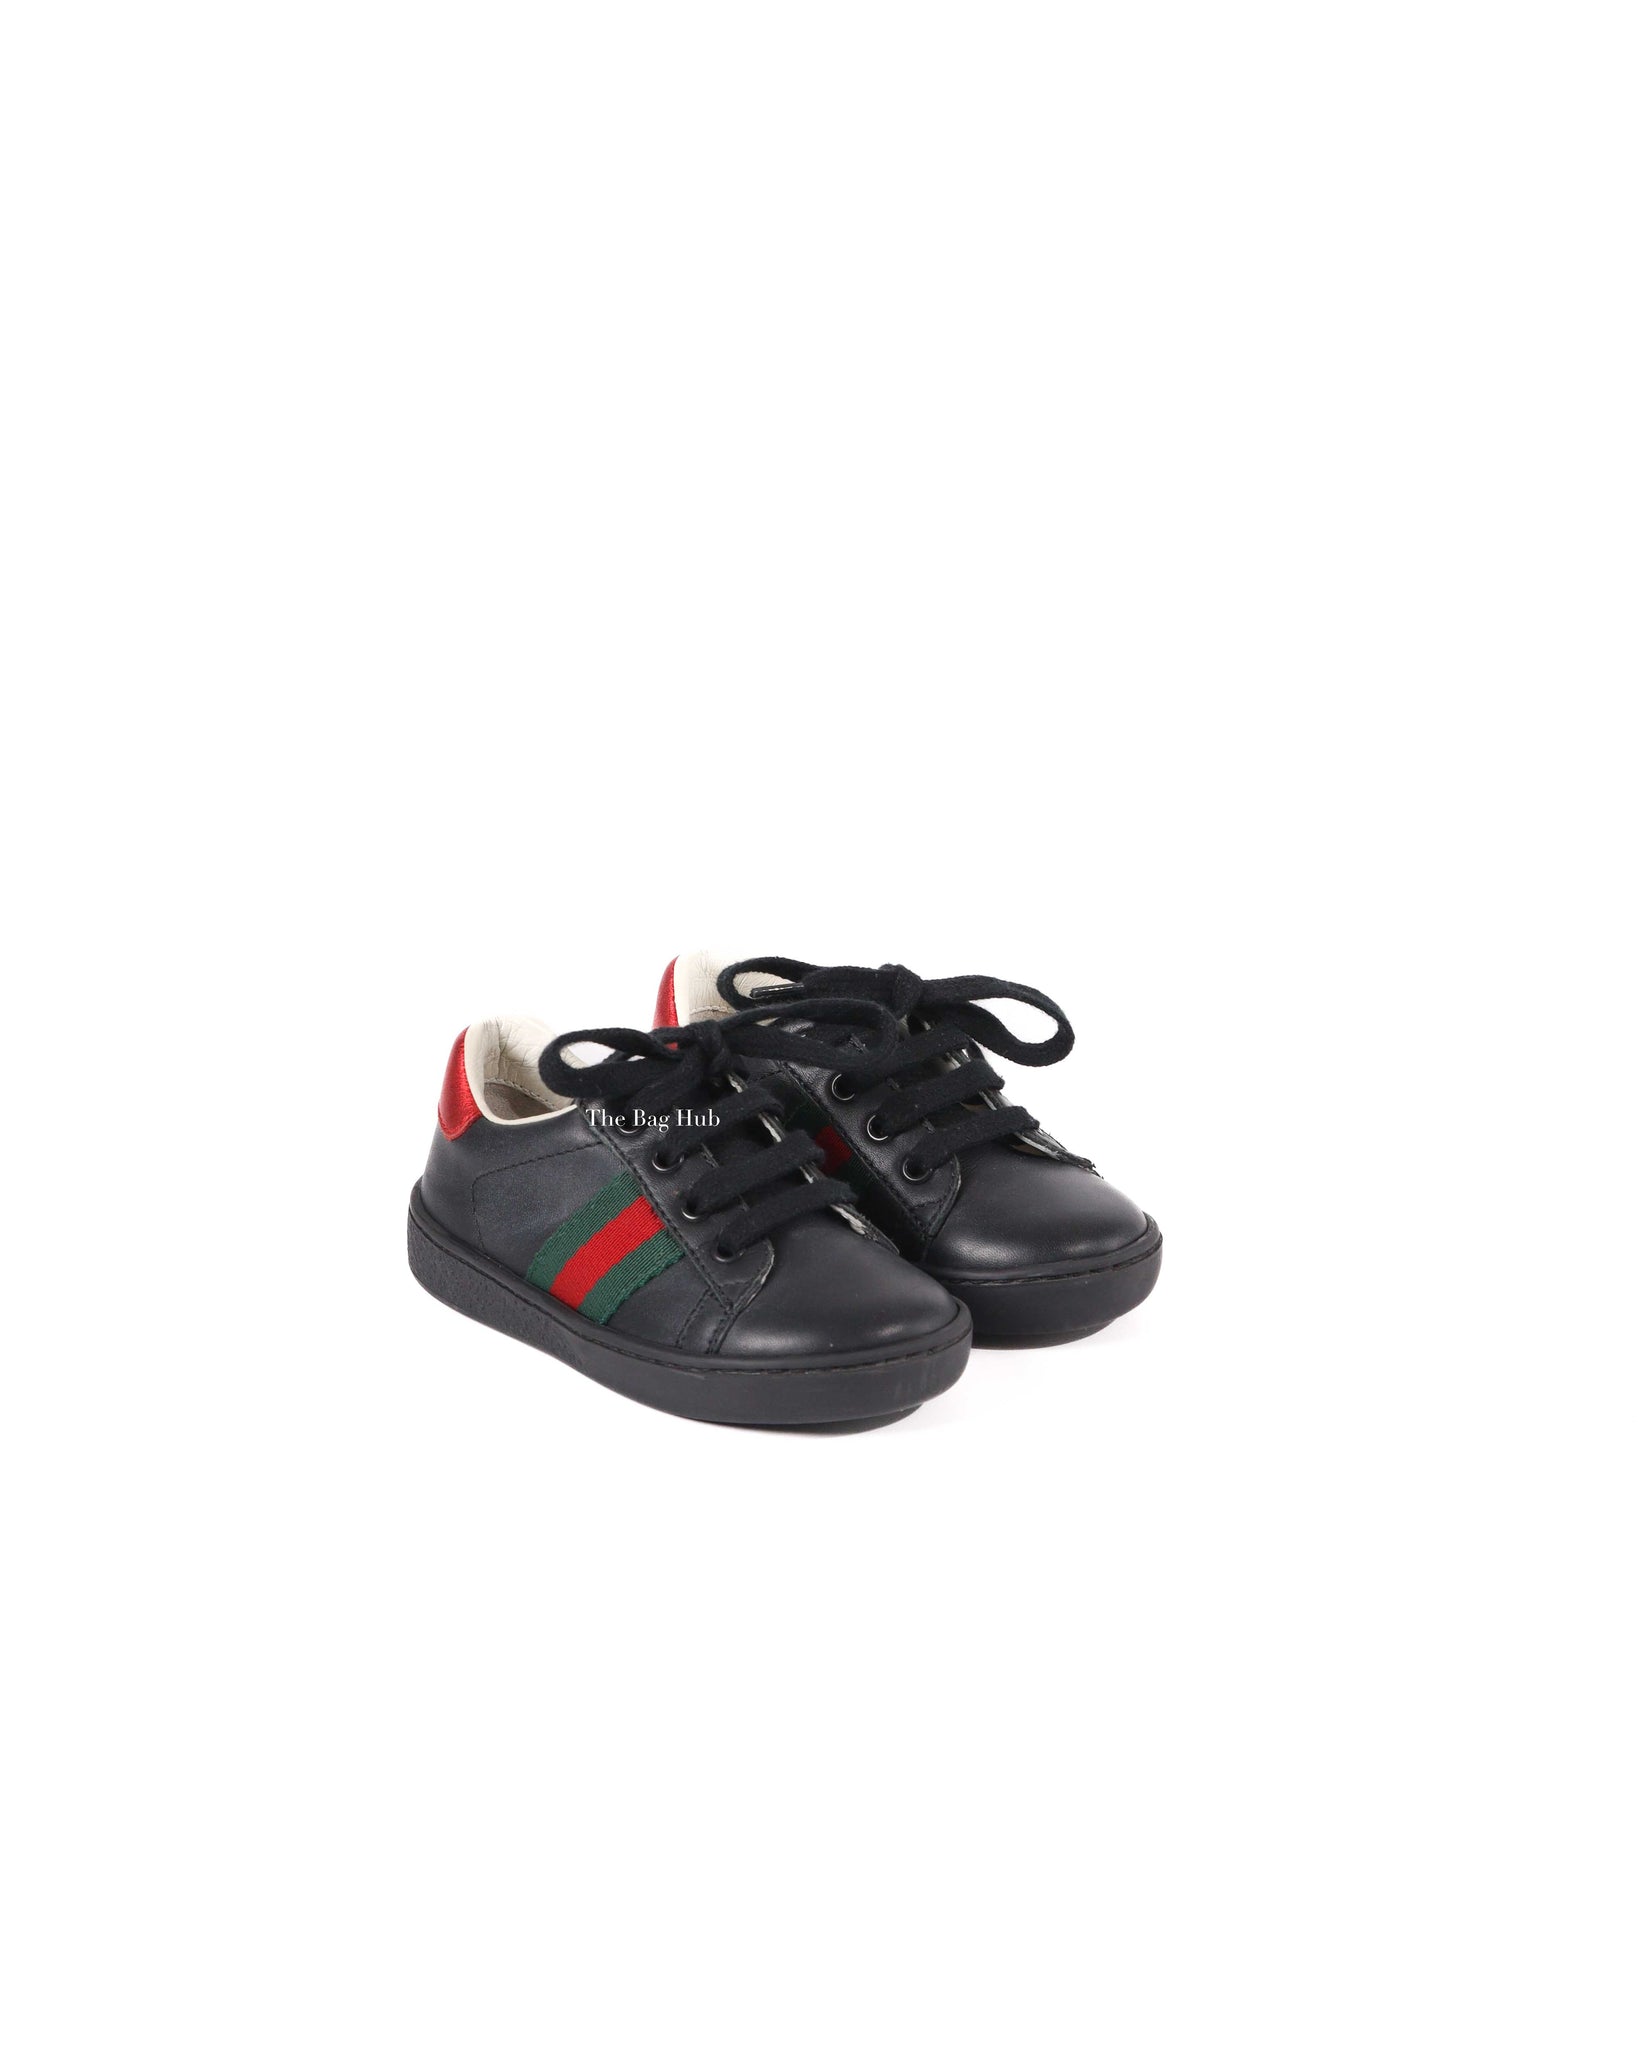 Gucci Black/Red/Green Web Toddler Low Sneakers Size 21 | Designer Brand Authentic Gucci | The Bag